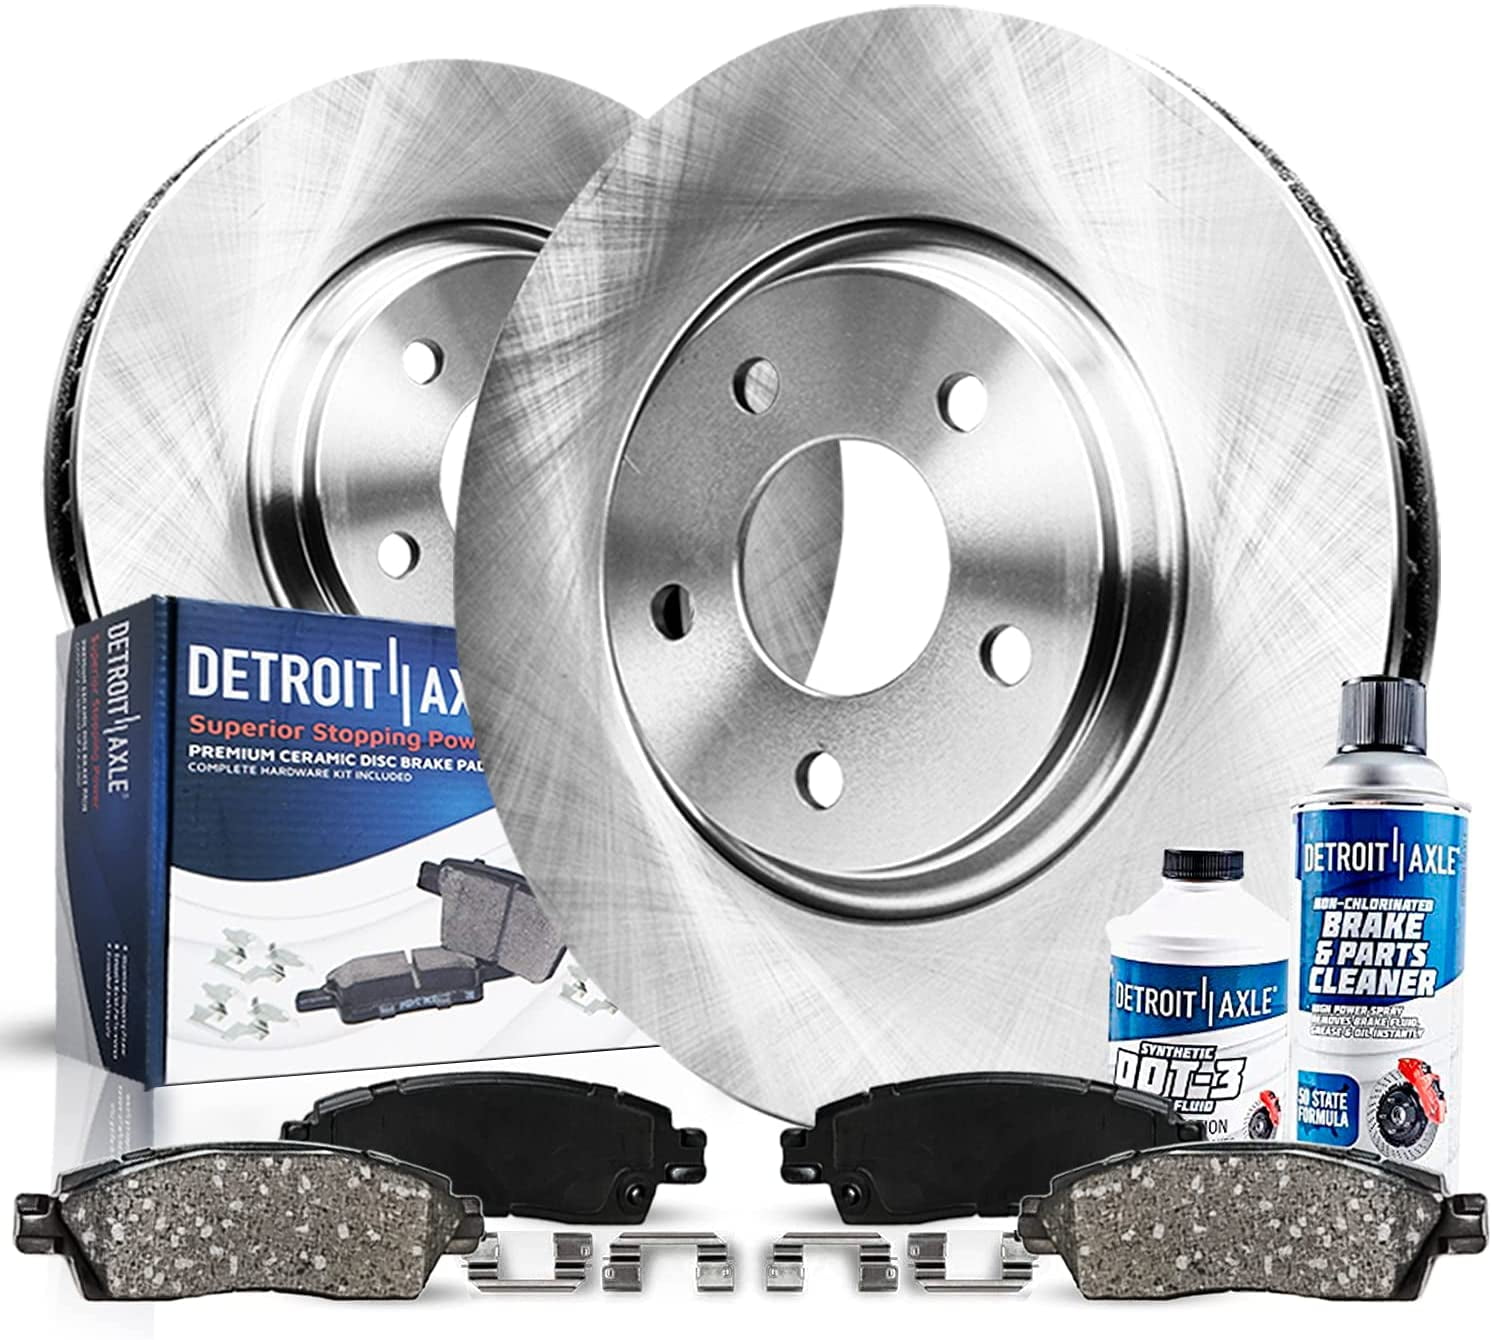 Detroit Axle - Front Brake Rotors w/Ceramic Pads Cleaner & Fluid  Replacement for Ford Escape Mercury Mariner Mazda Tribute